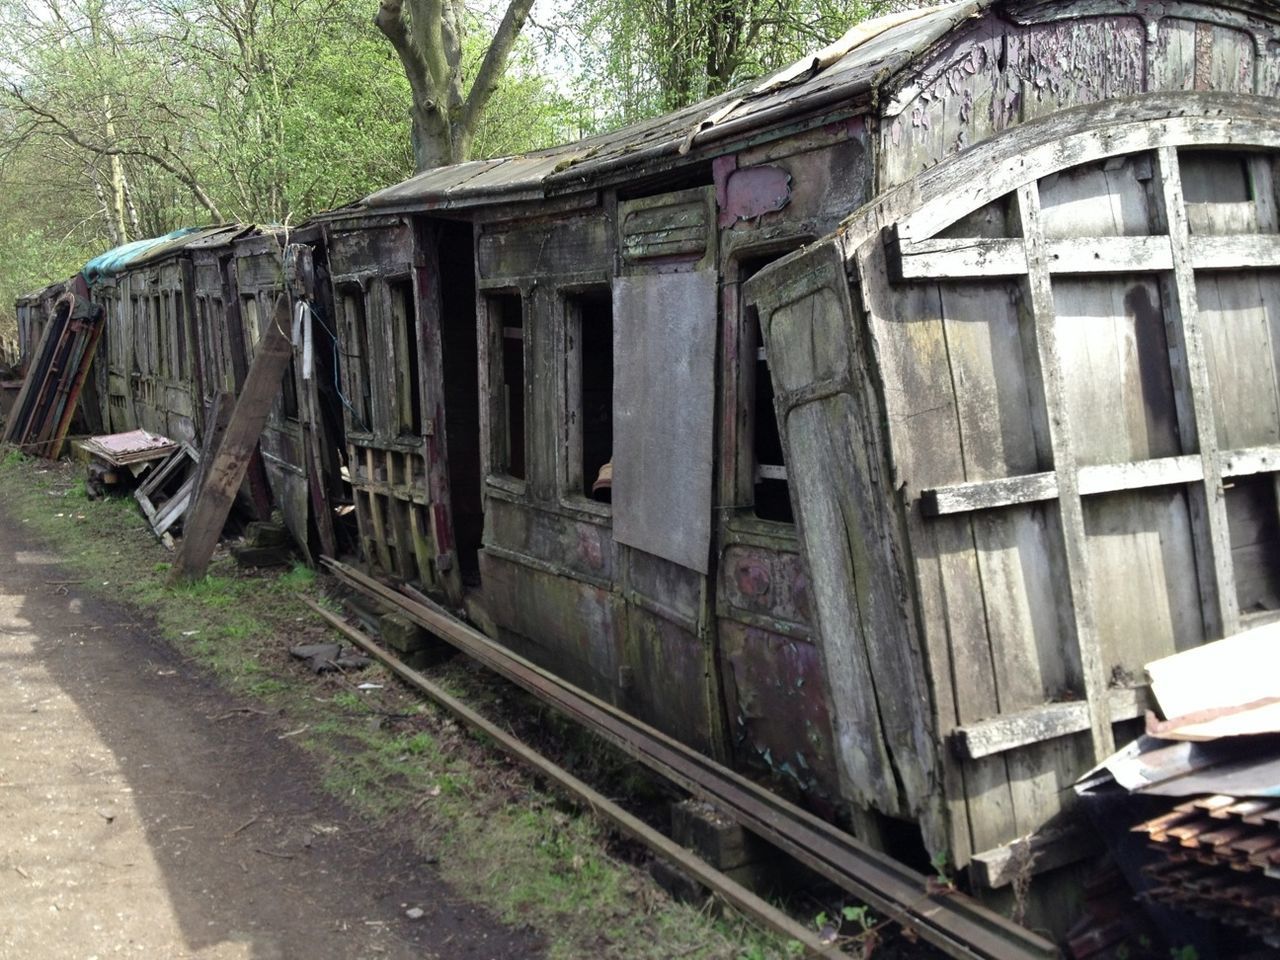 built structure, architecture, building exterior, transportation, abandoned, mode of transport, old, obsolete, tree, damaged, house, land vehicle, railroad track, run-down, deterioration, day, outdoors, rail transportation, car, weathered